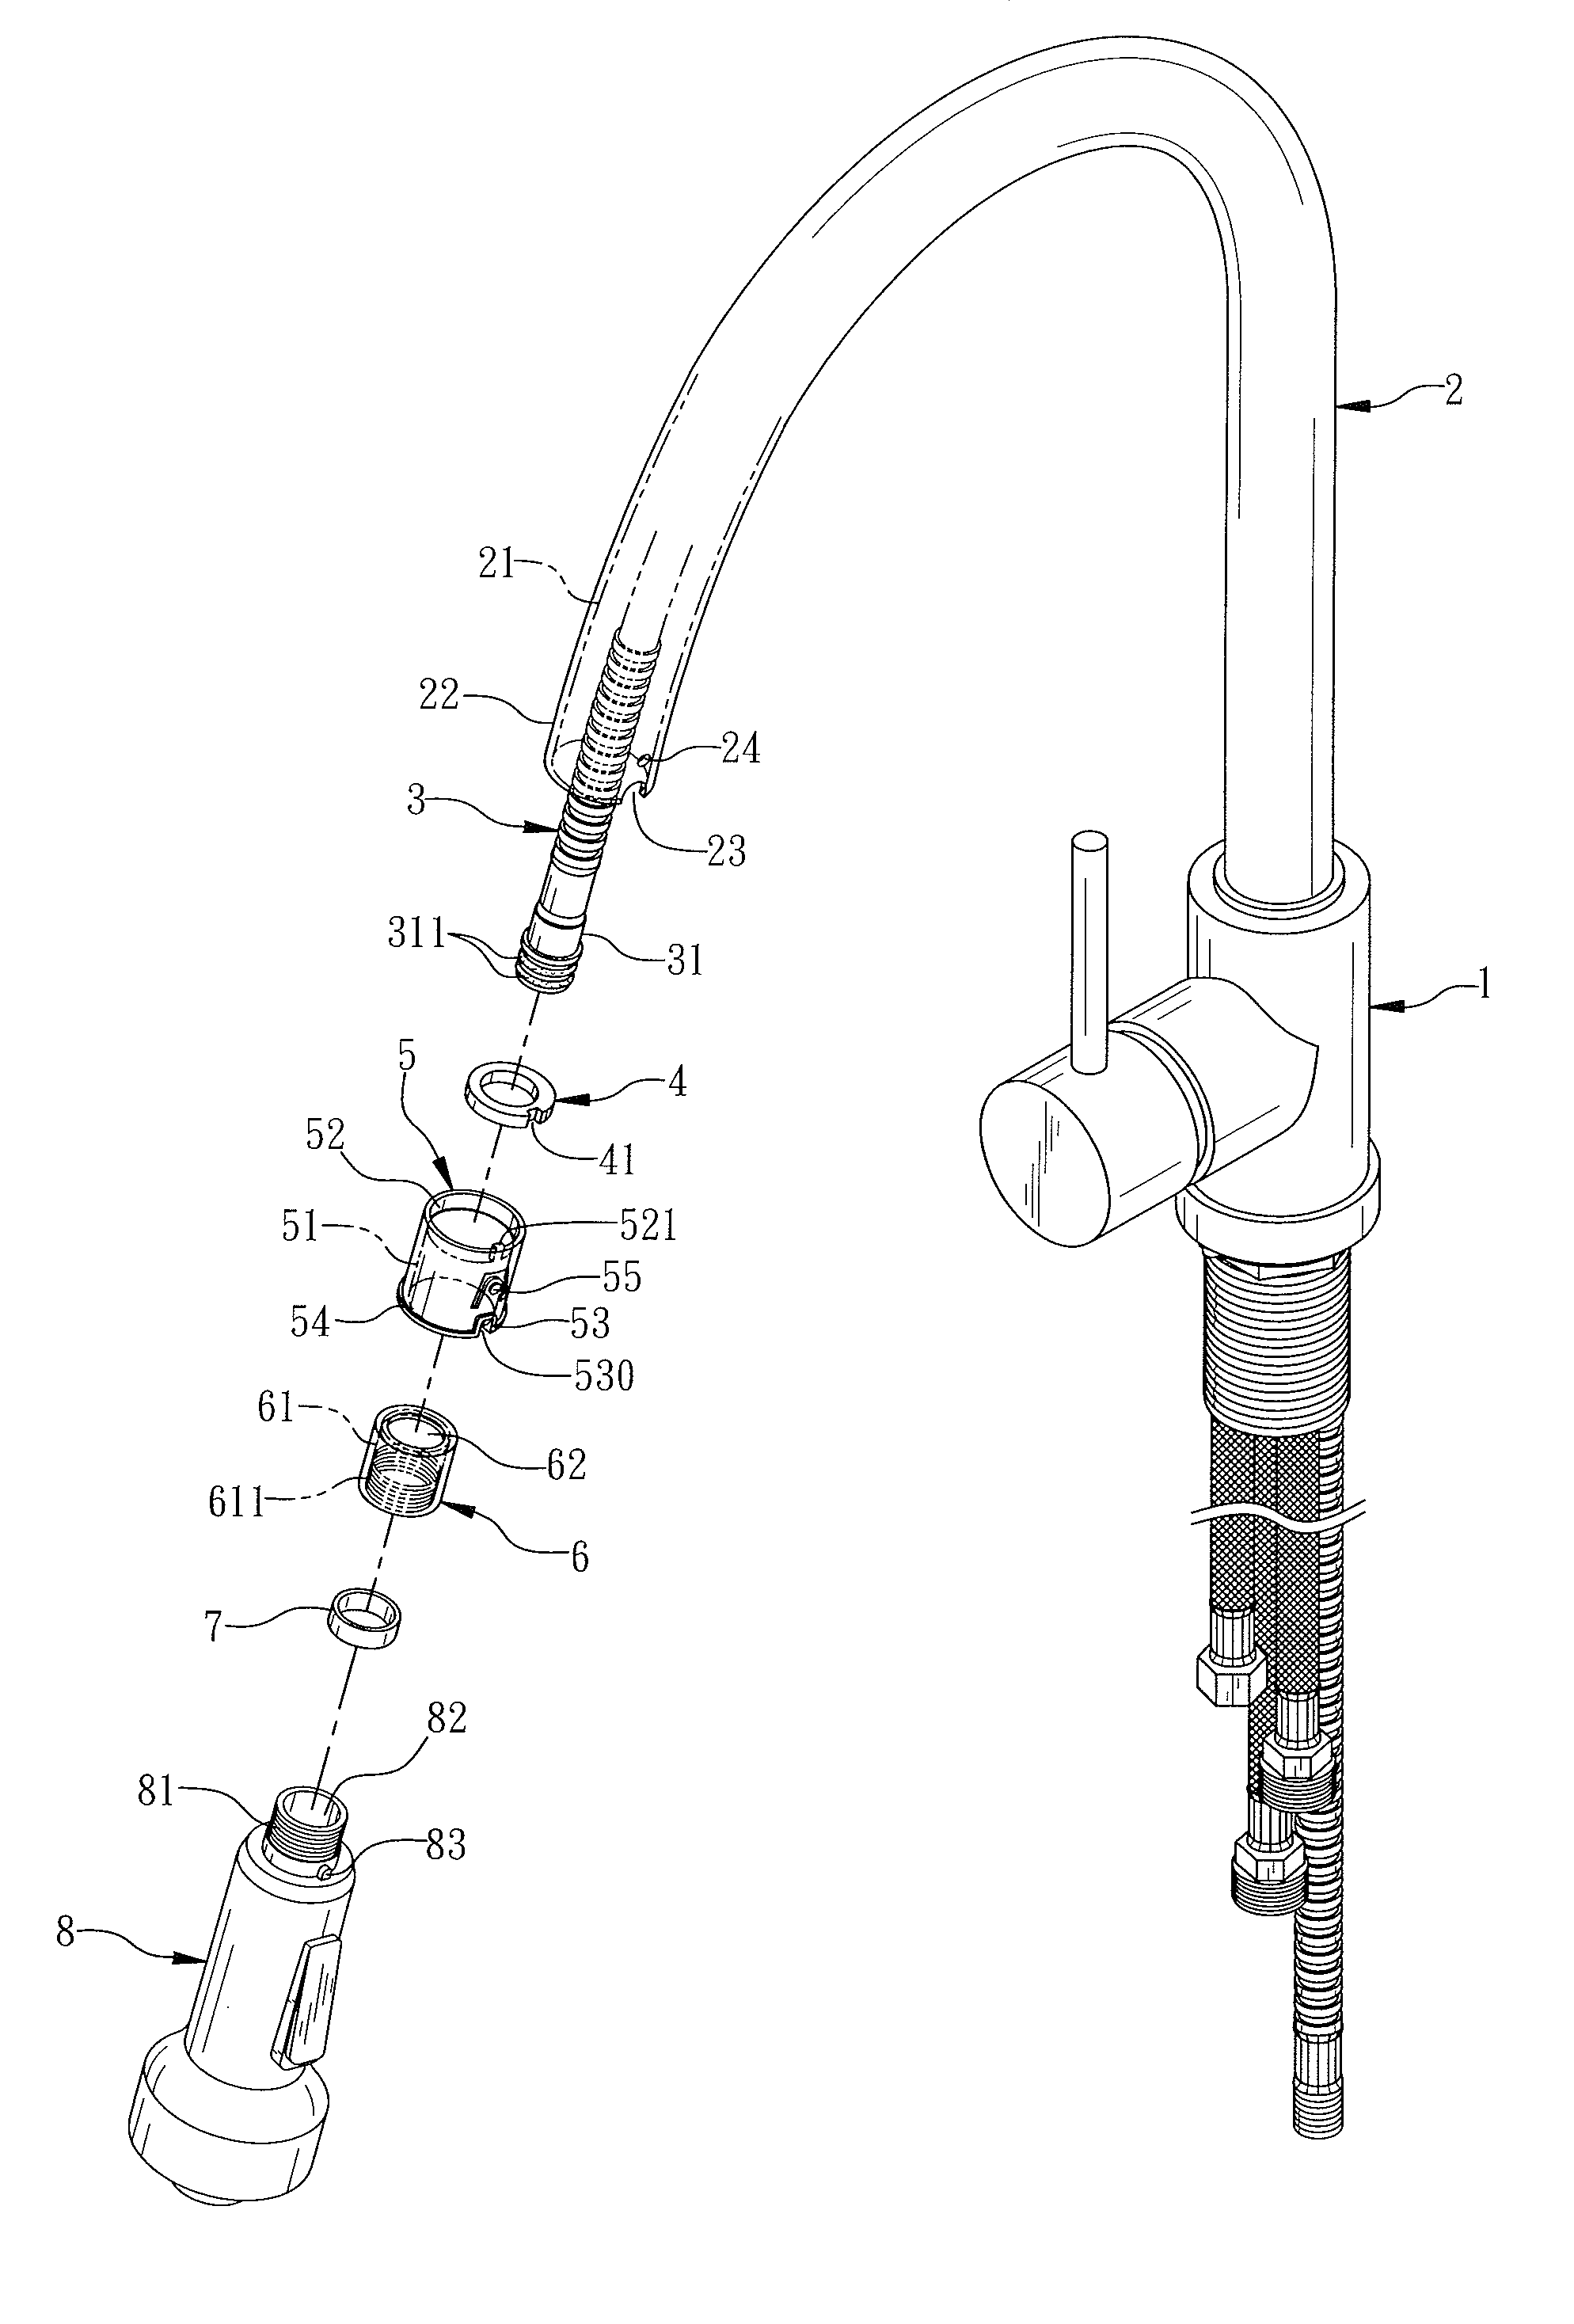 Faucet with retractable spout that can be positioned quickly and automatically